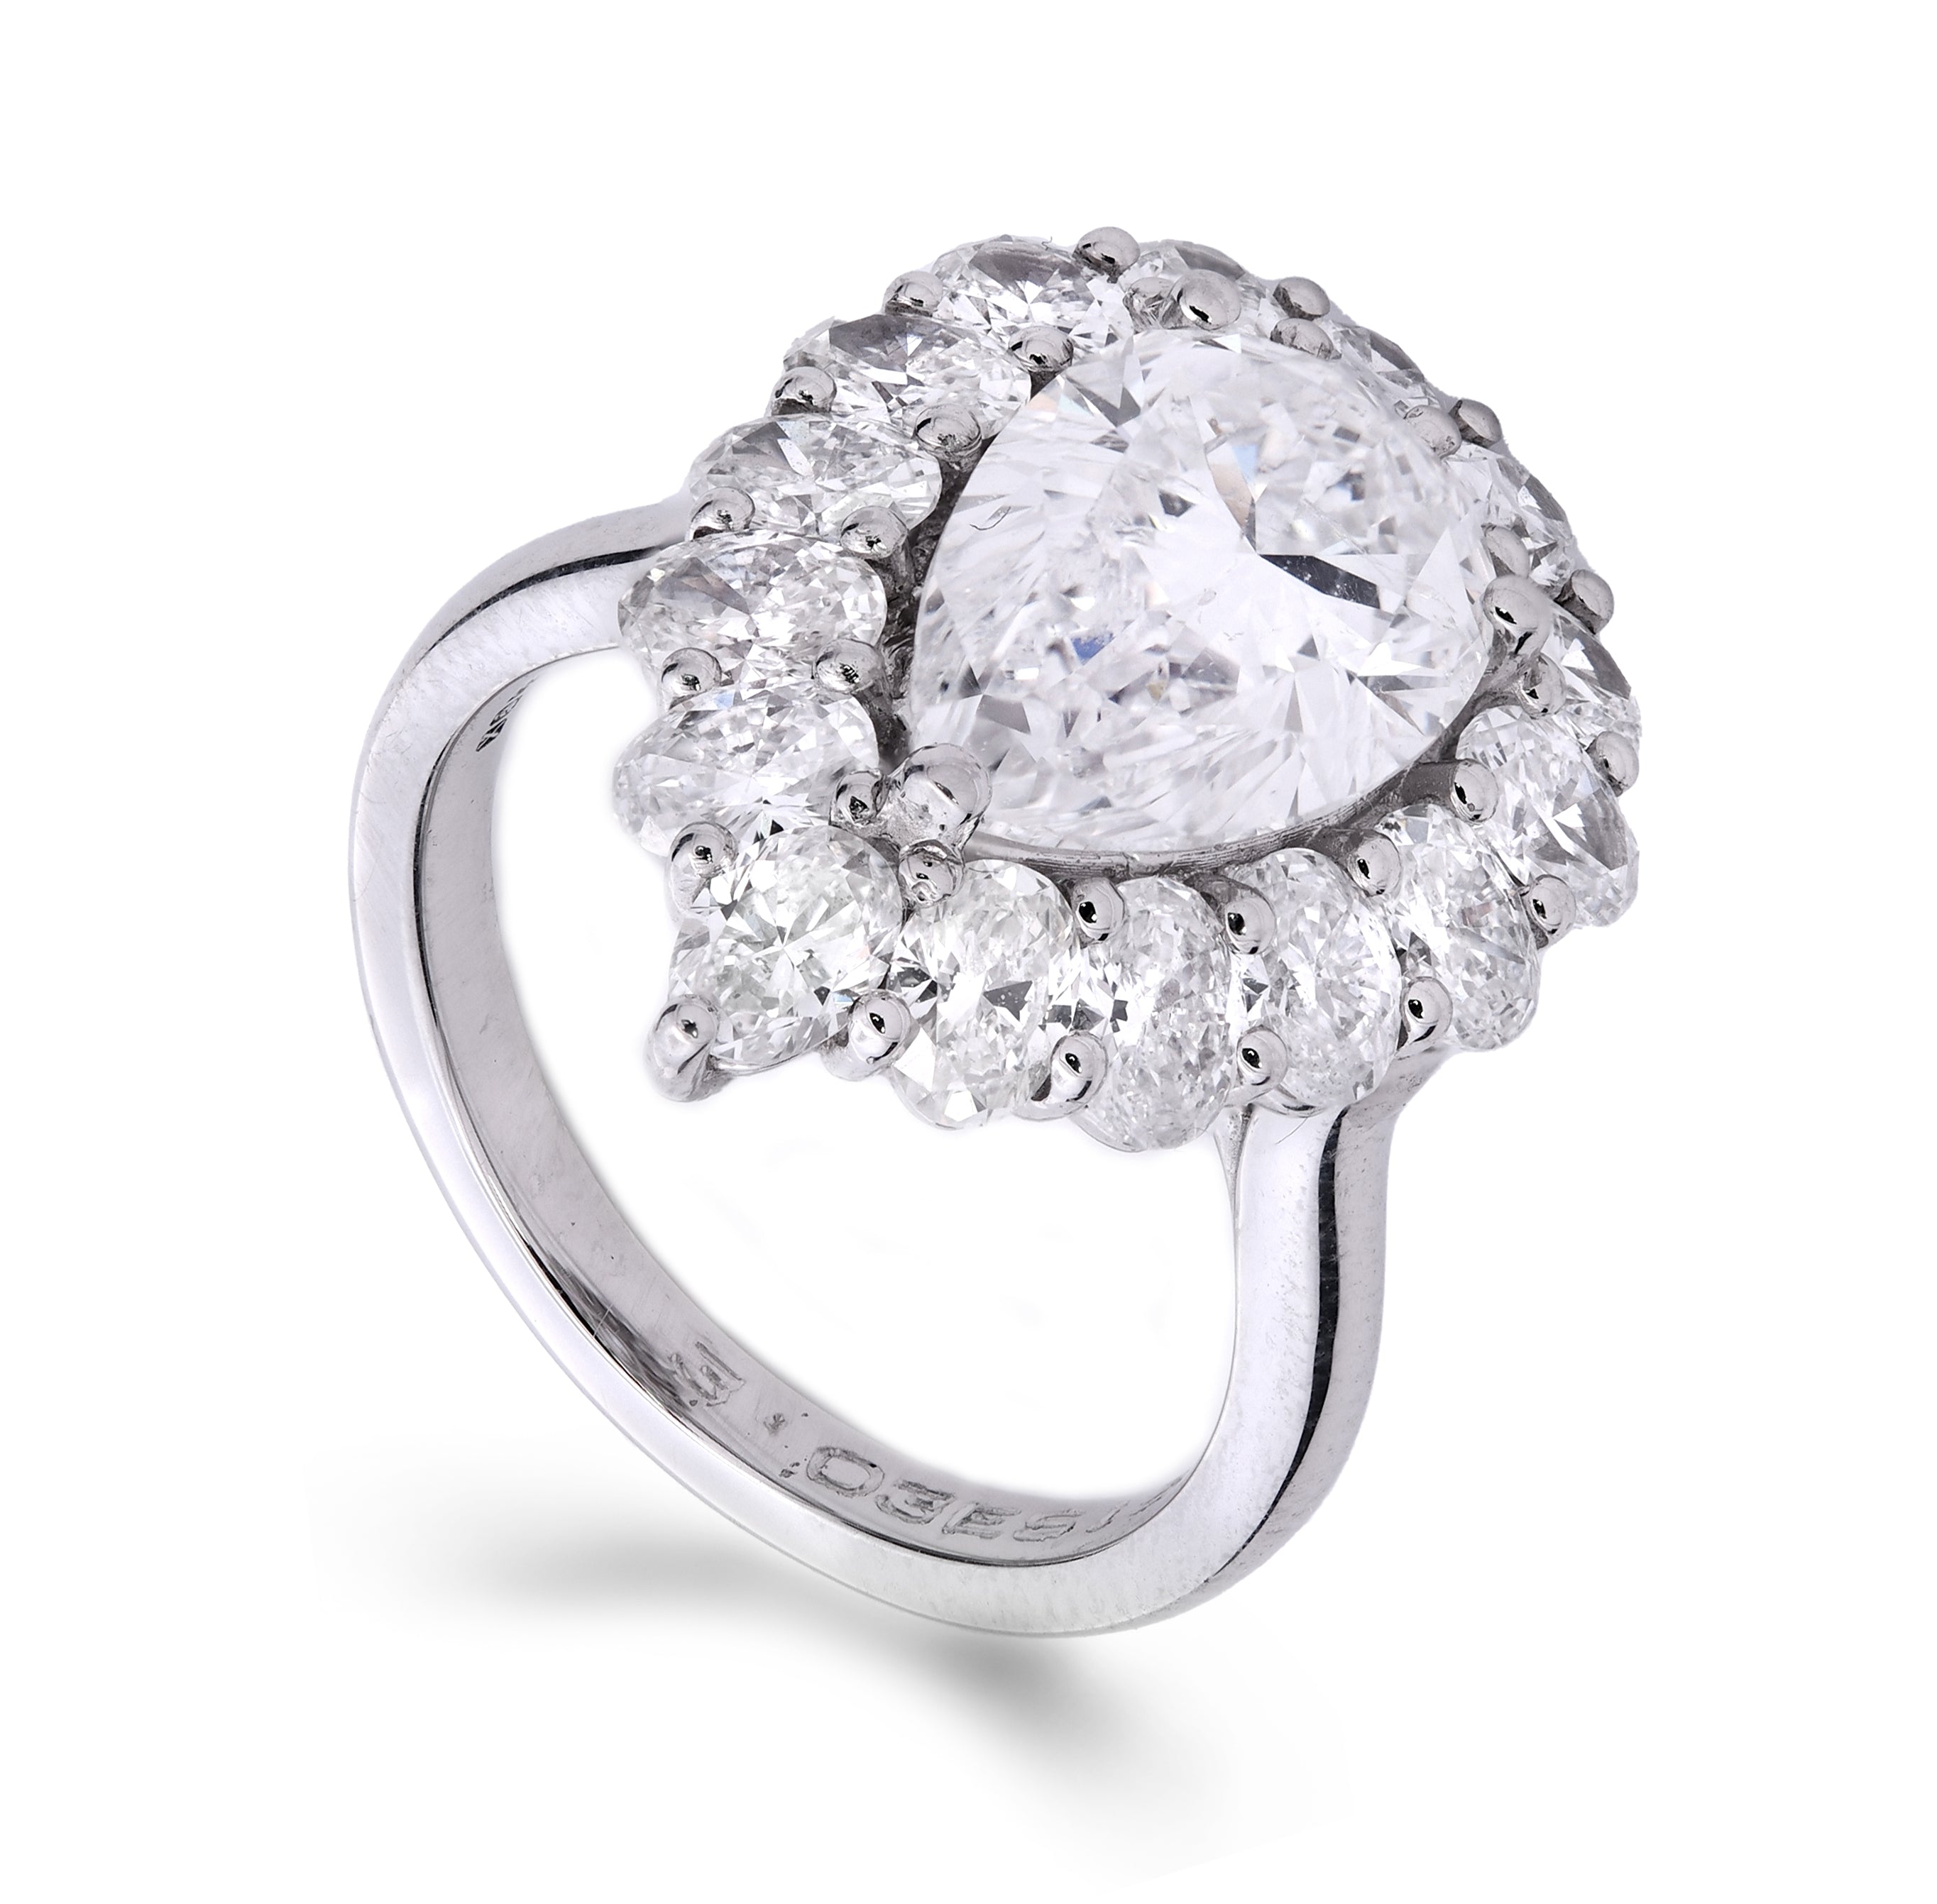 Cluster Unique Ring Pear Shape 3.03 ct with Oval Diamonds 2.18 ct on the Sides in Platinum 950 GIA Certified